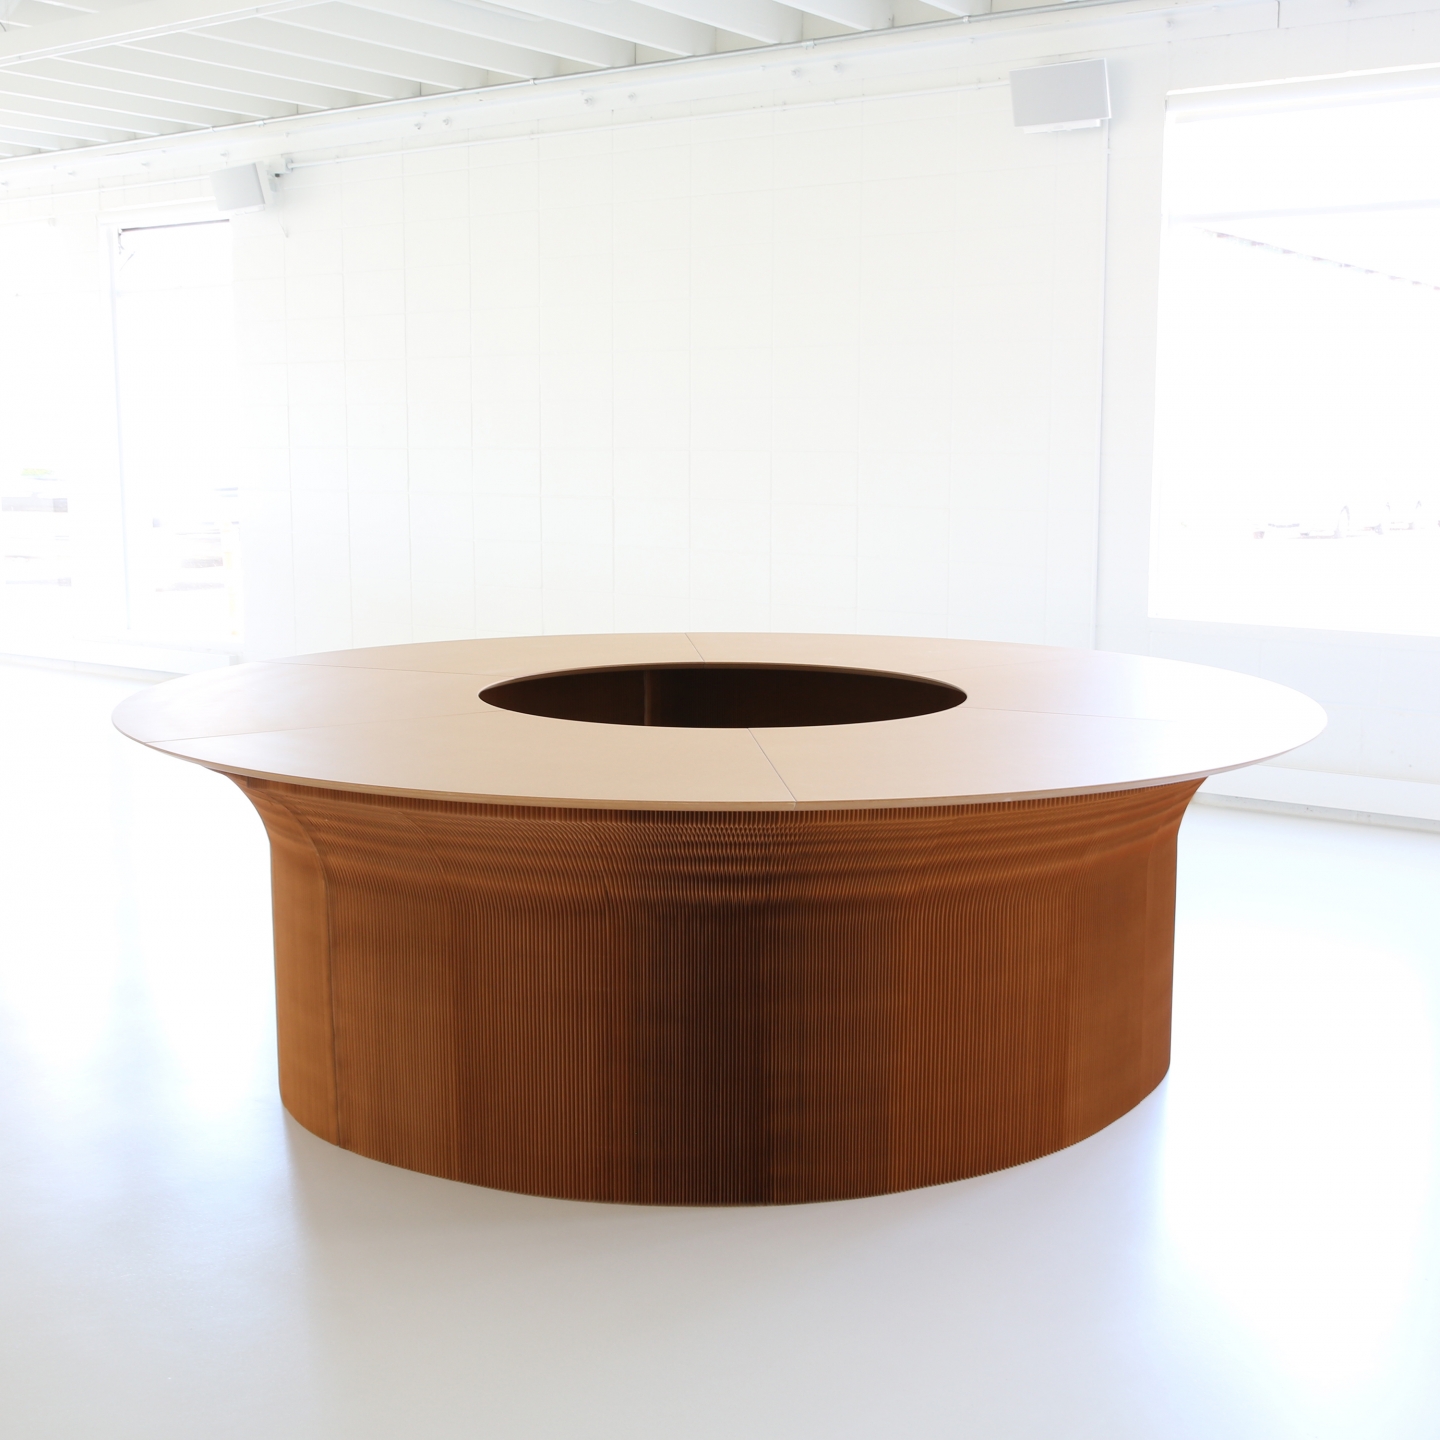 wedge top cantilever table forming a large, round table